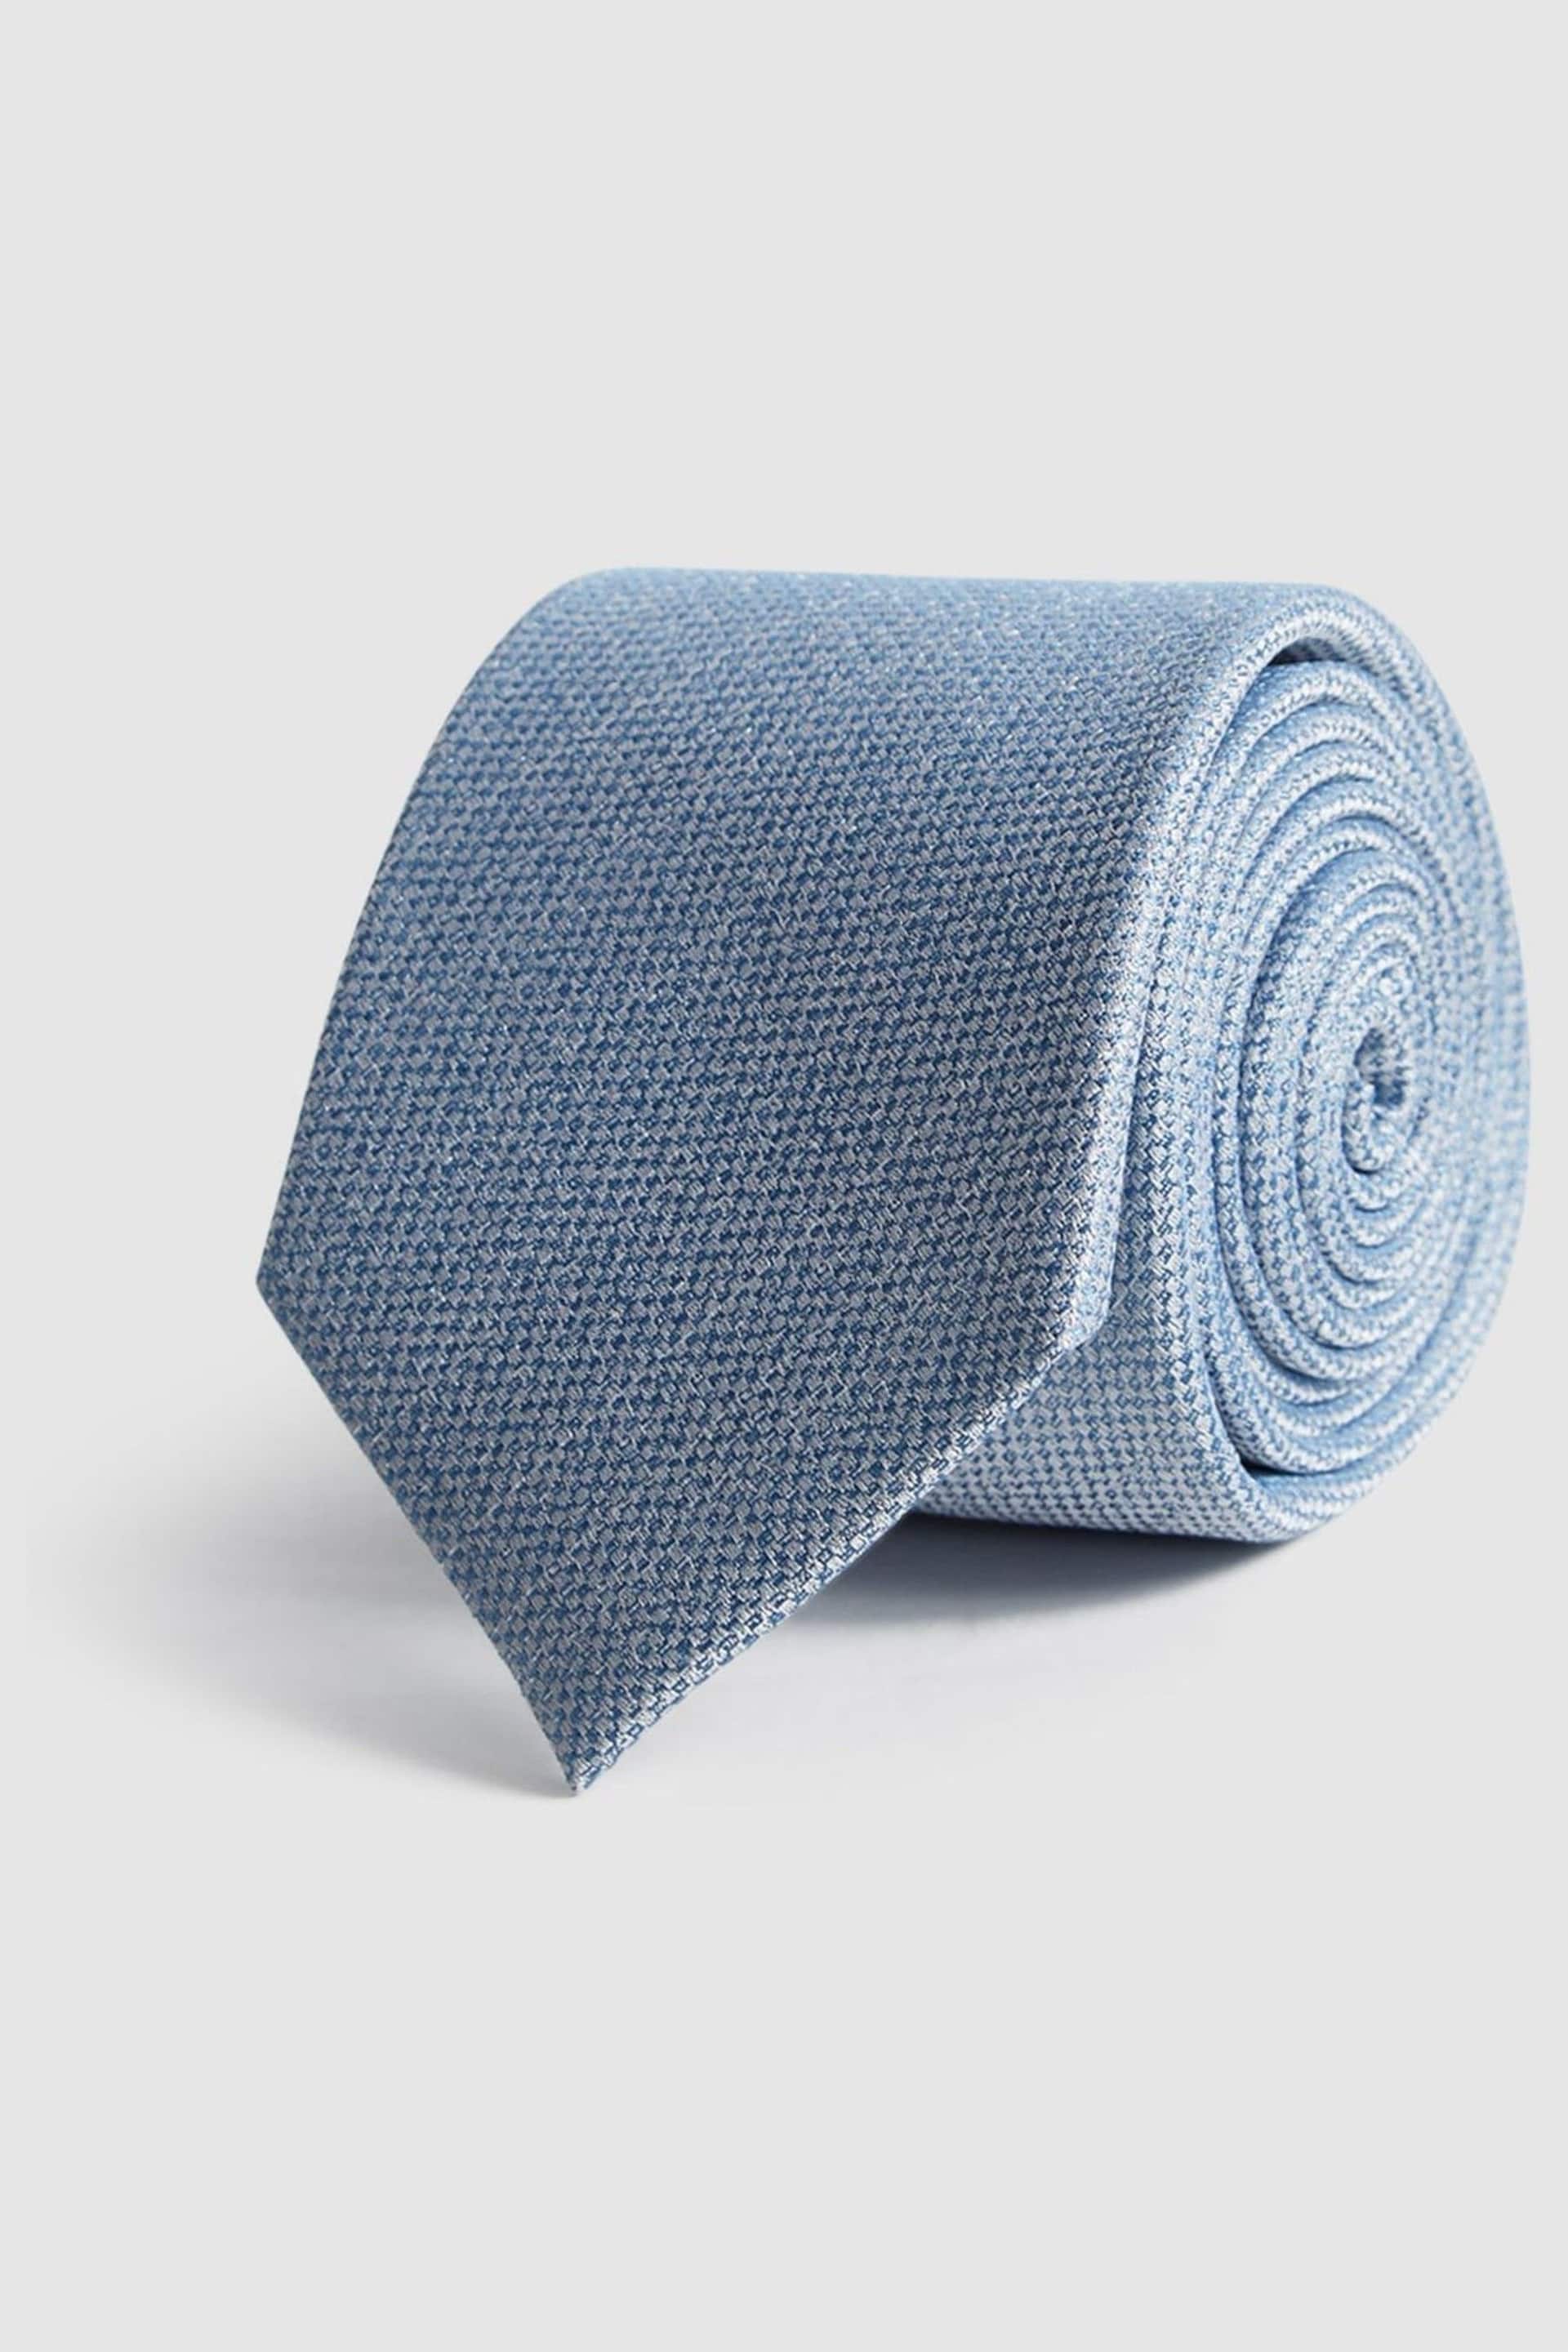 Reiss Airforce Blue Ceremony Textured Silk Tie - Image 1 of 4